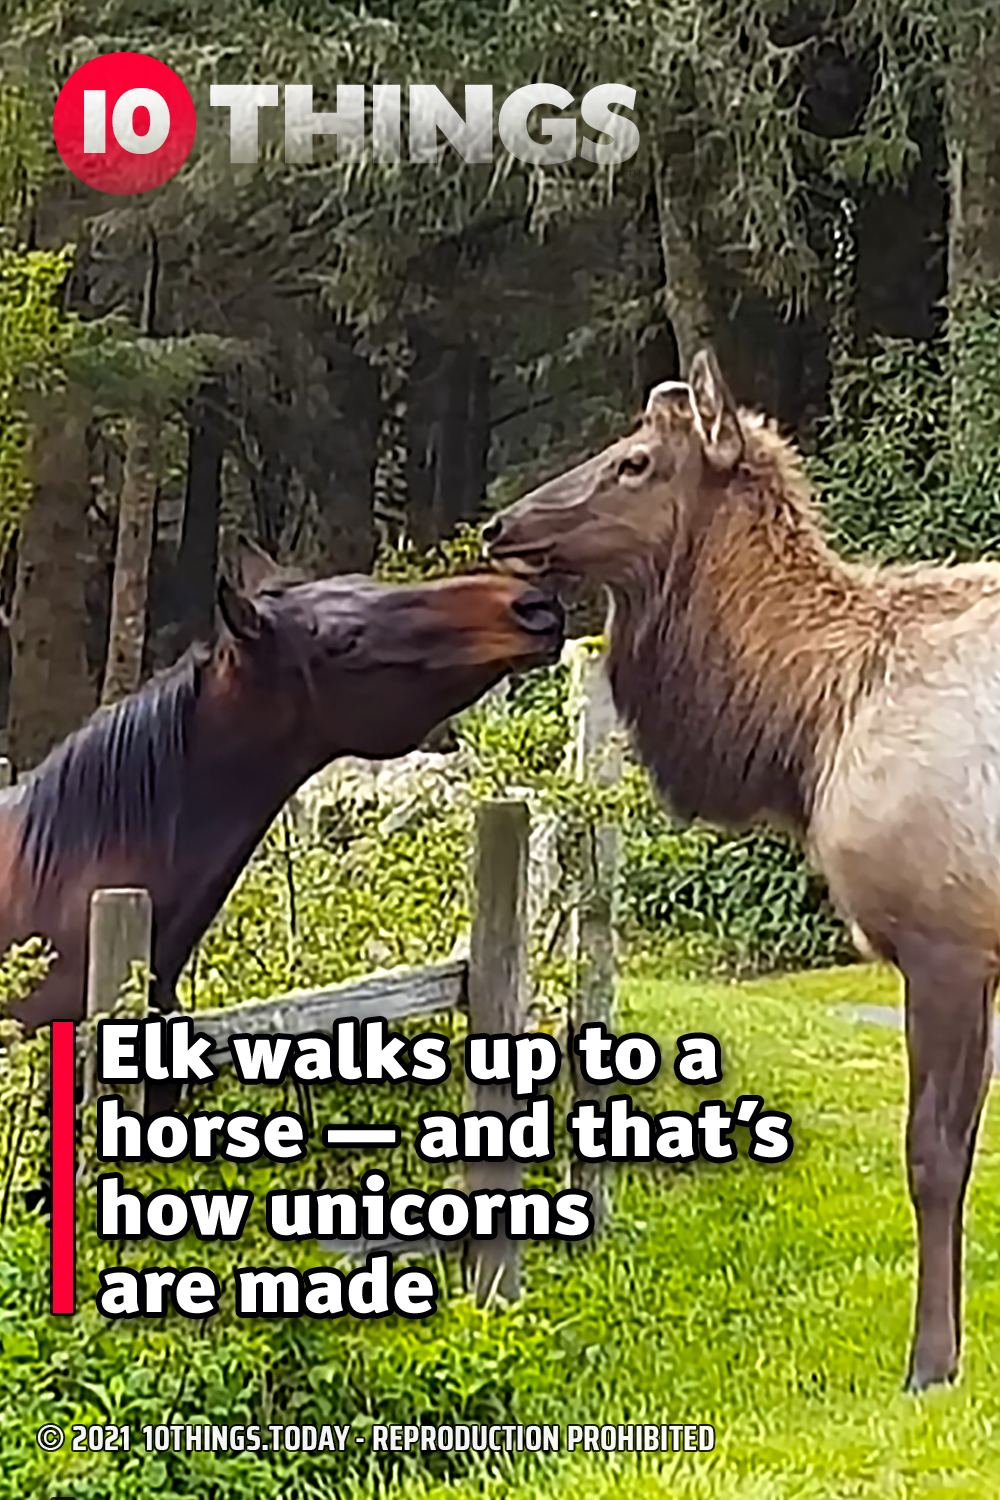 Elk walks up to a horse — and that’s how unicorns are made